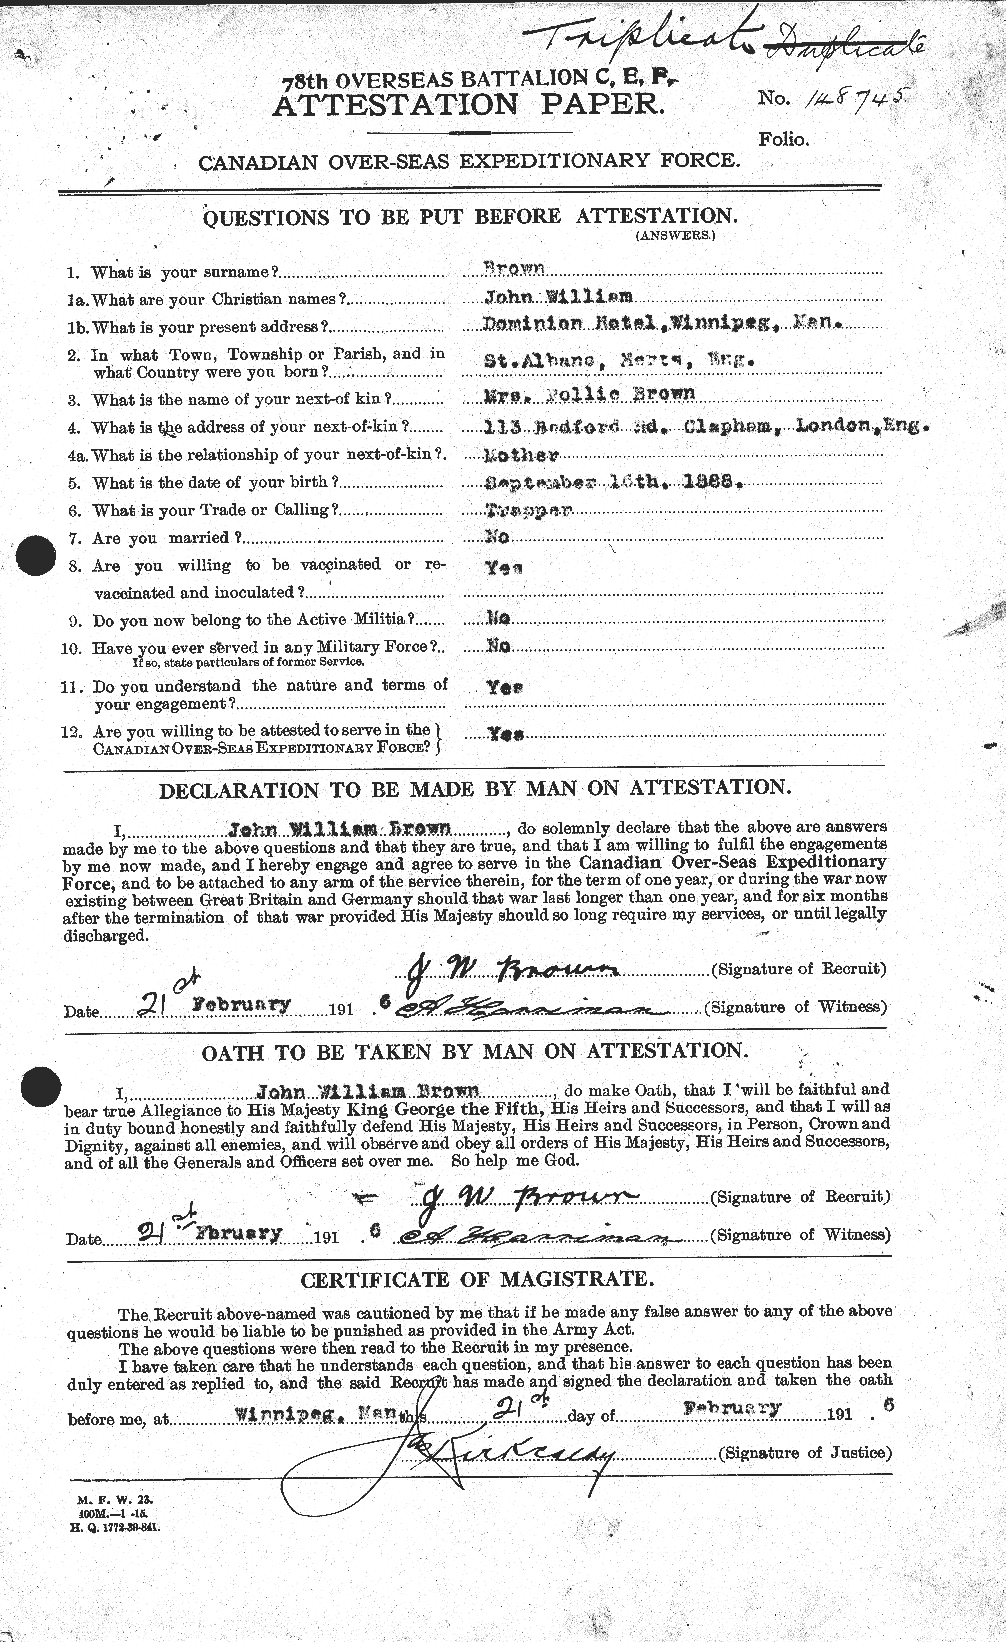 Personnel Records of the First World War - CEF 265901a